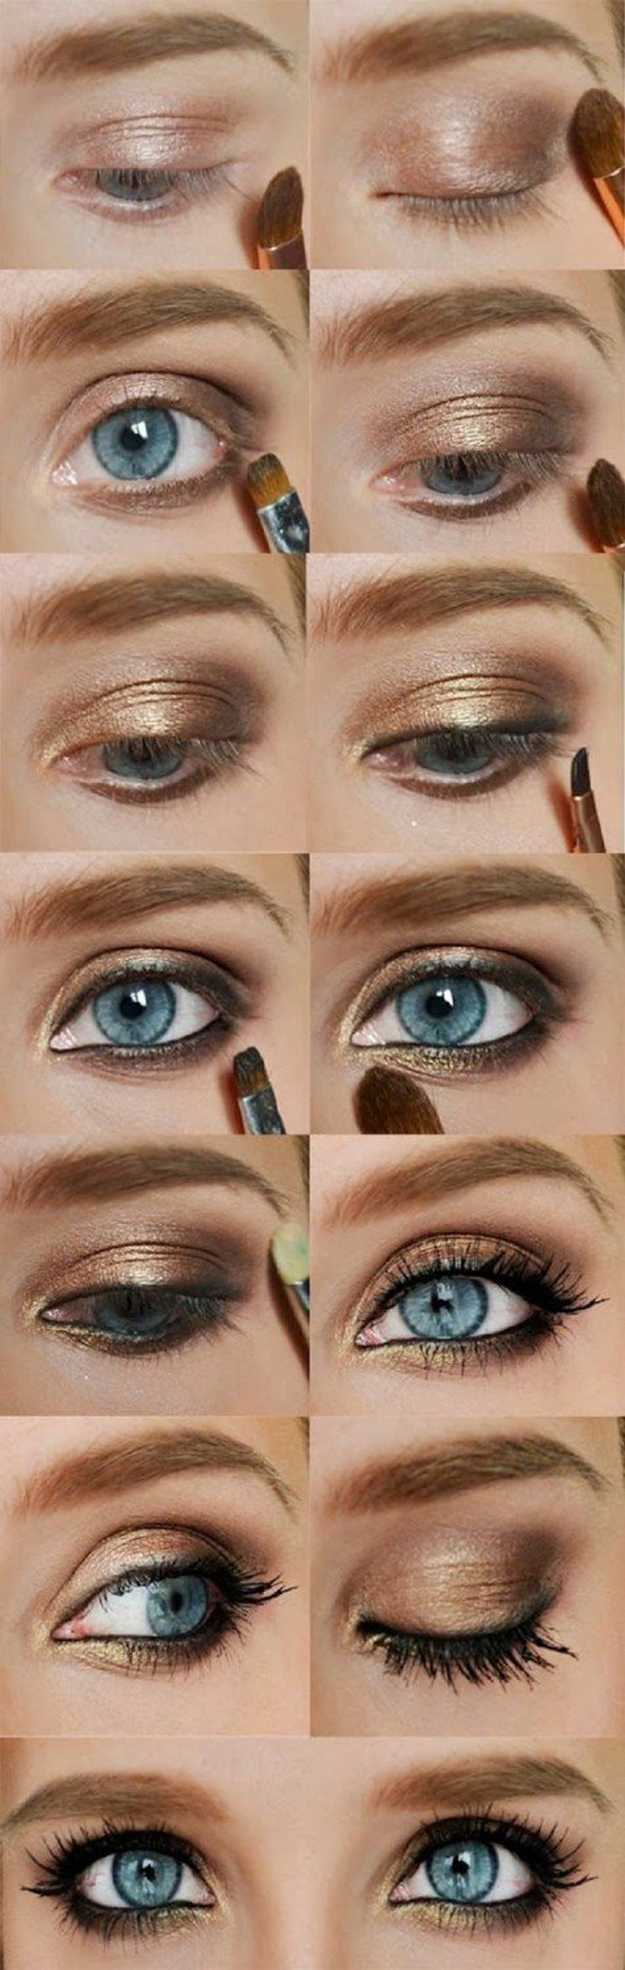 Blue And Gold Eye Makeup Colorful Eyeshadow Tutorials For Blue Eyes Makeup Tutorials